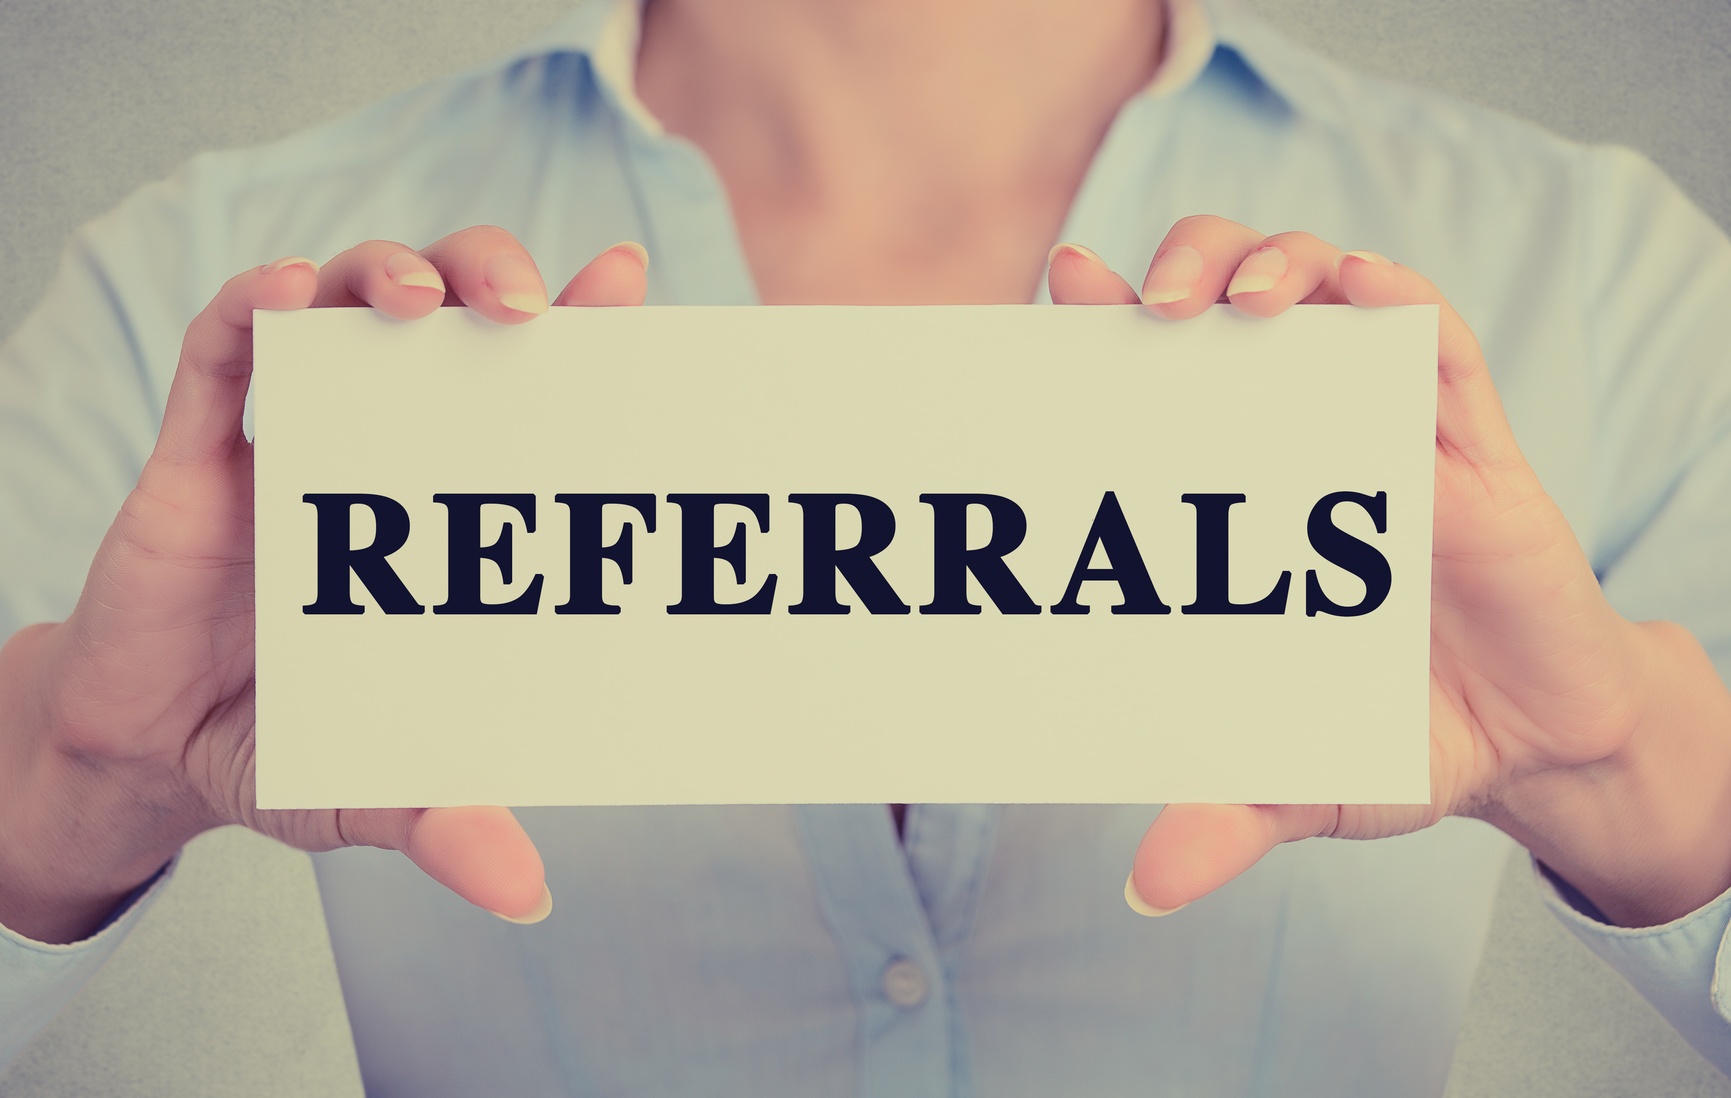 Social Media Showcases the Power of Referrals